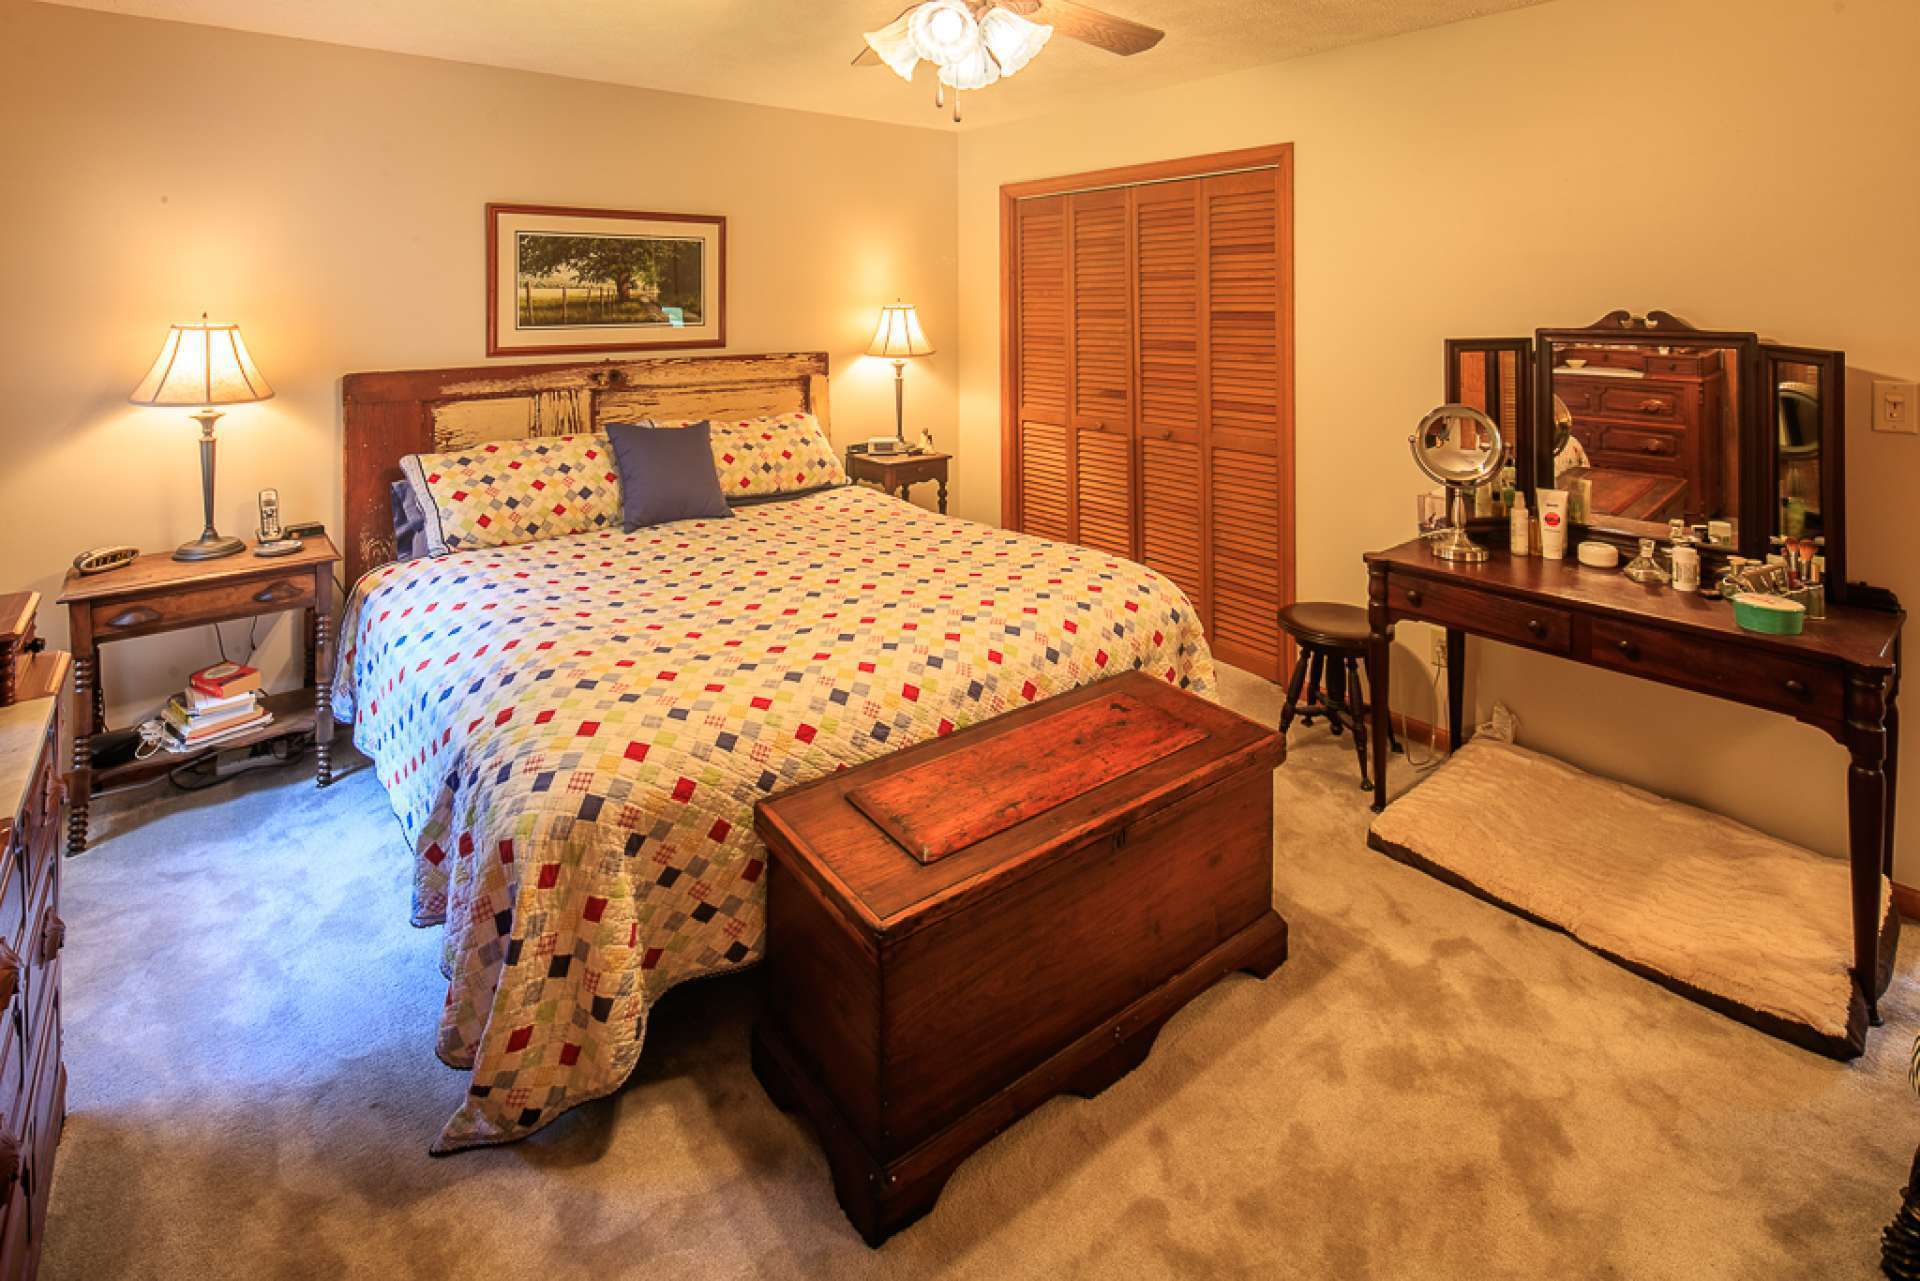 This spacious bedroom on the upper level offers a private bath and could serve as a second master option.